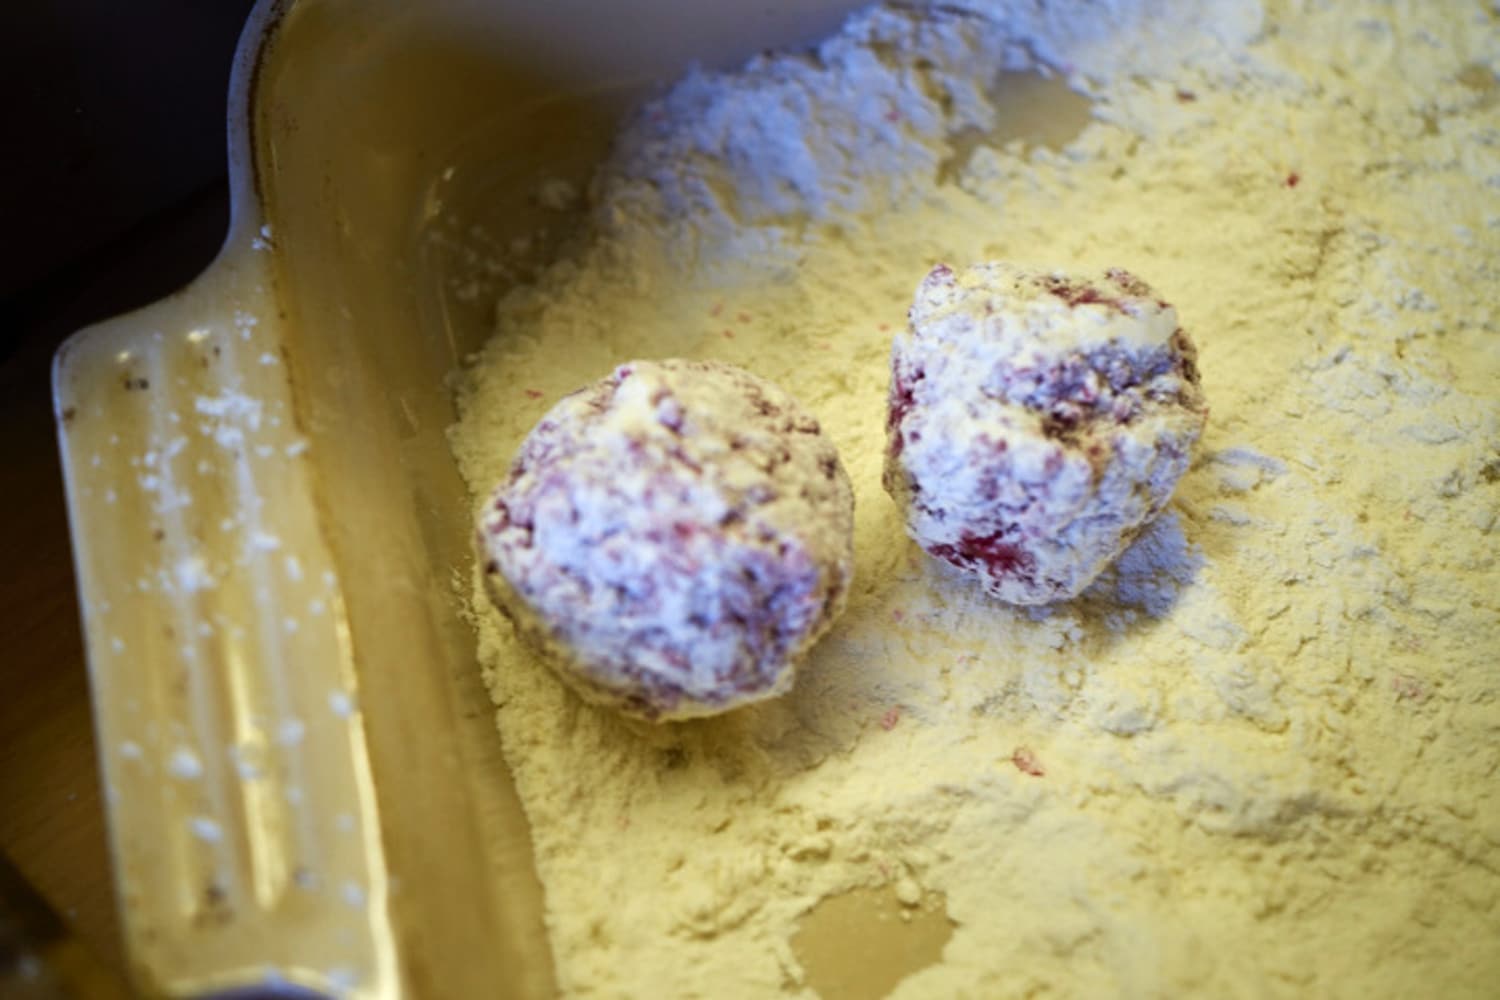 Coating the balls in flour